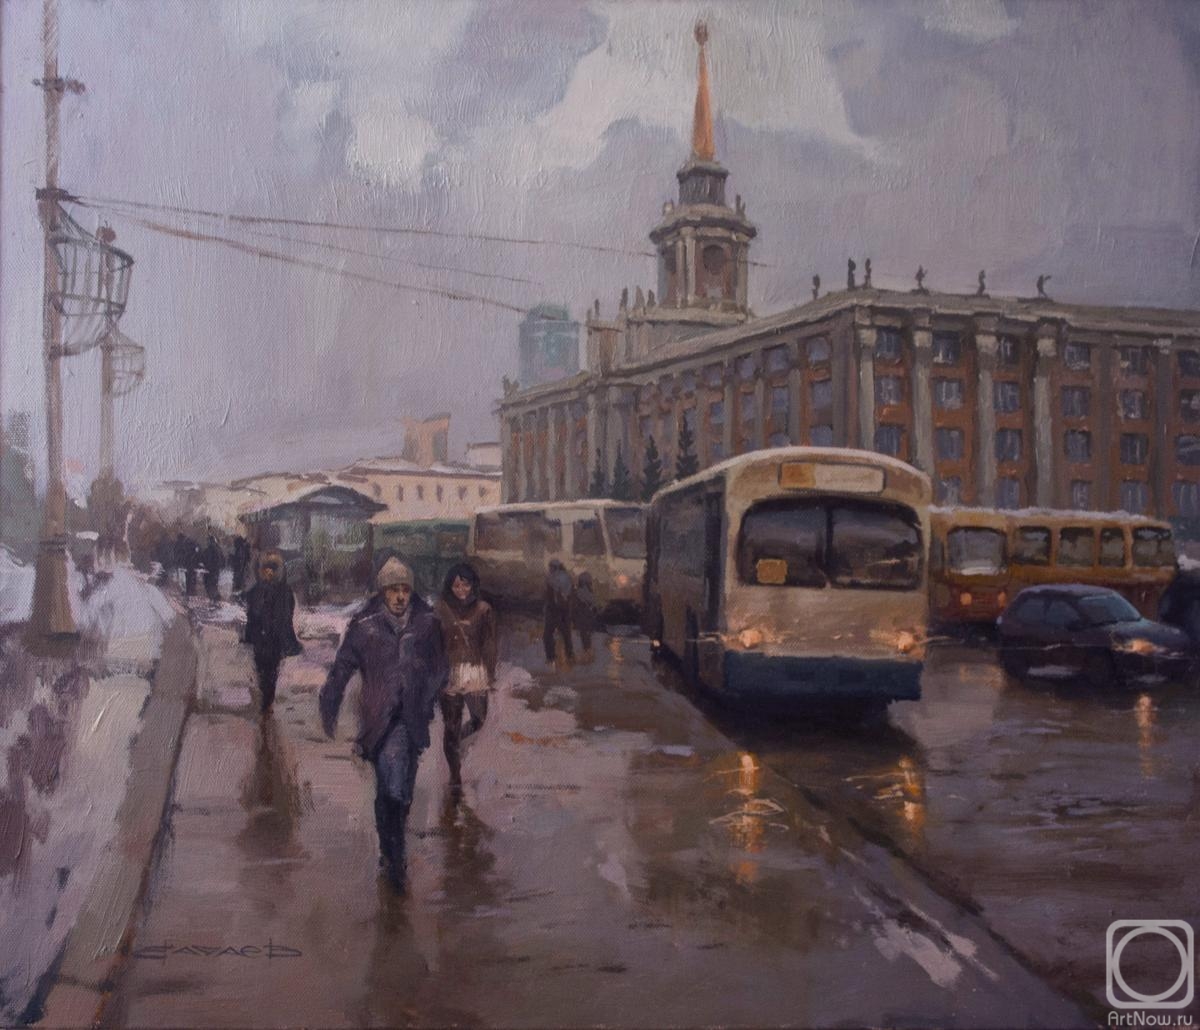 Vachaev Mihail. Stop at the square